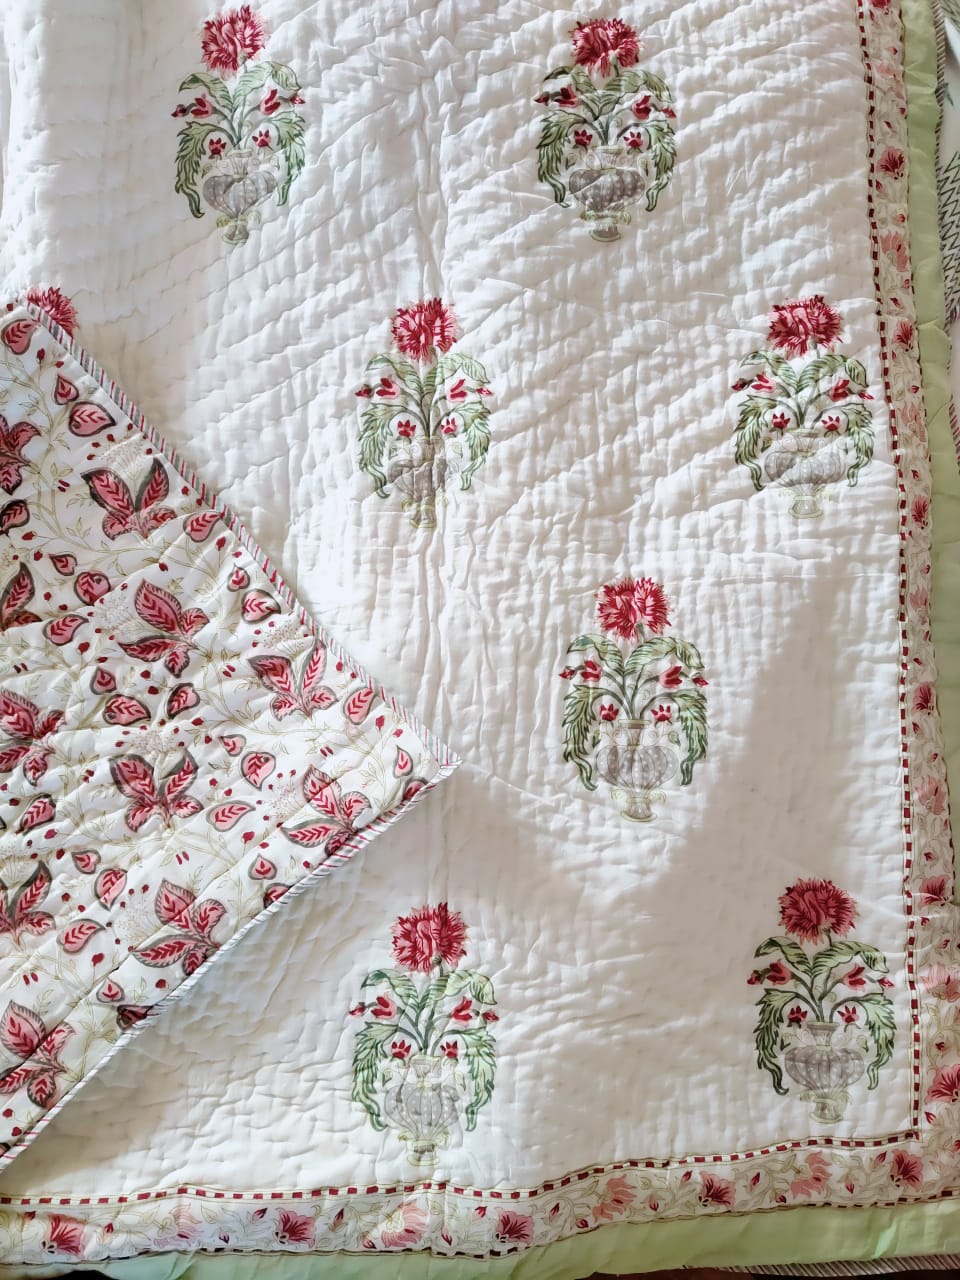 Floral Bahaar Light Cotton Muslin Block Printed Quilt - Double Size 90x108 inches